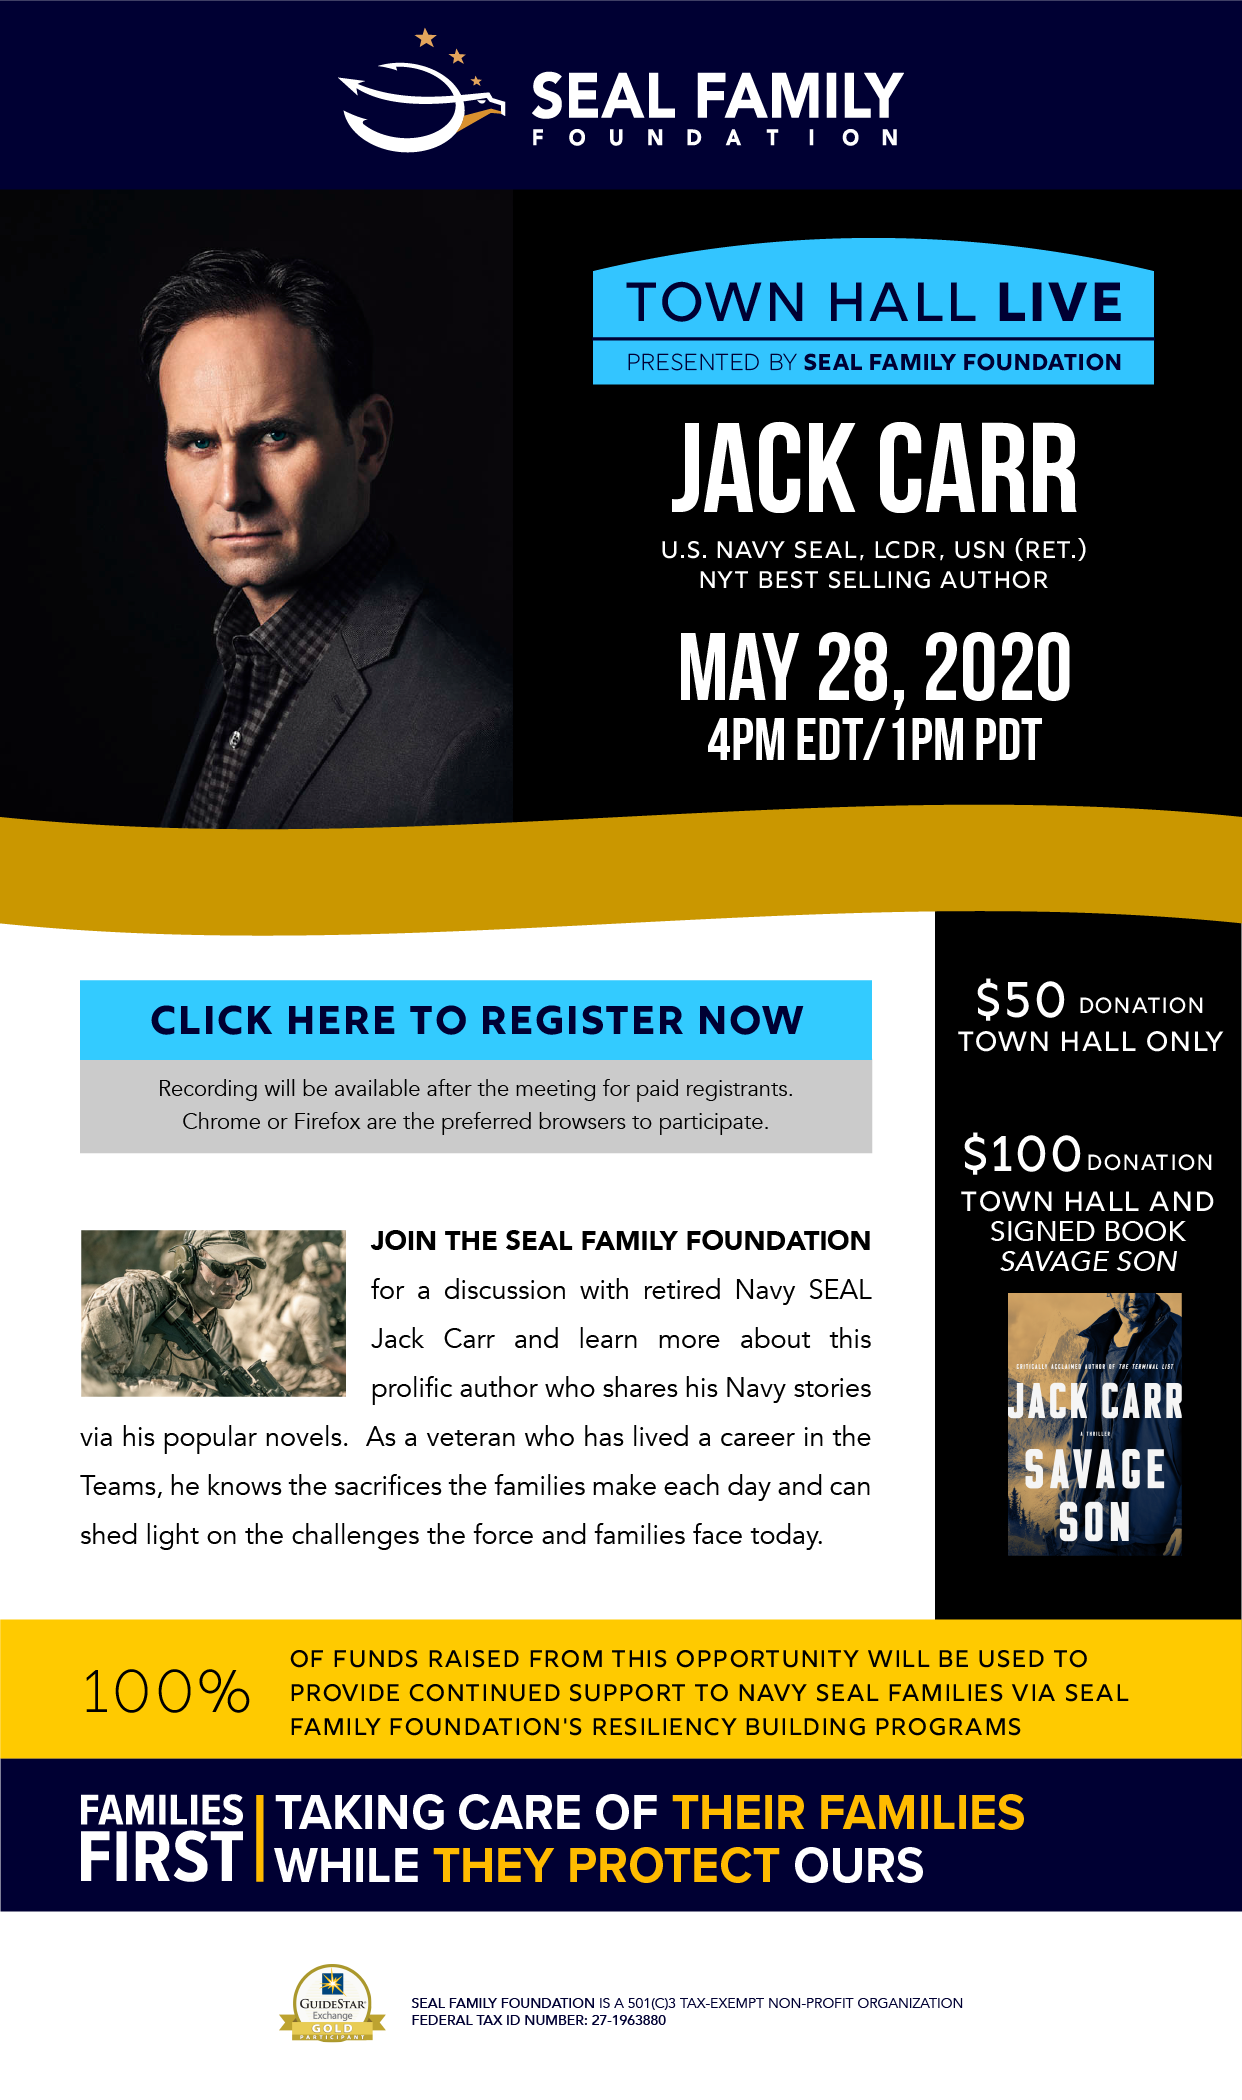 Town Hall Live with Jack Carr in support of the SEAL Family Foundation.  May 28, 2020